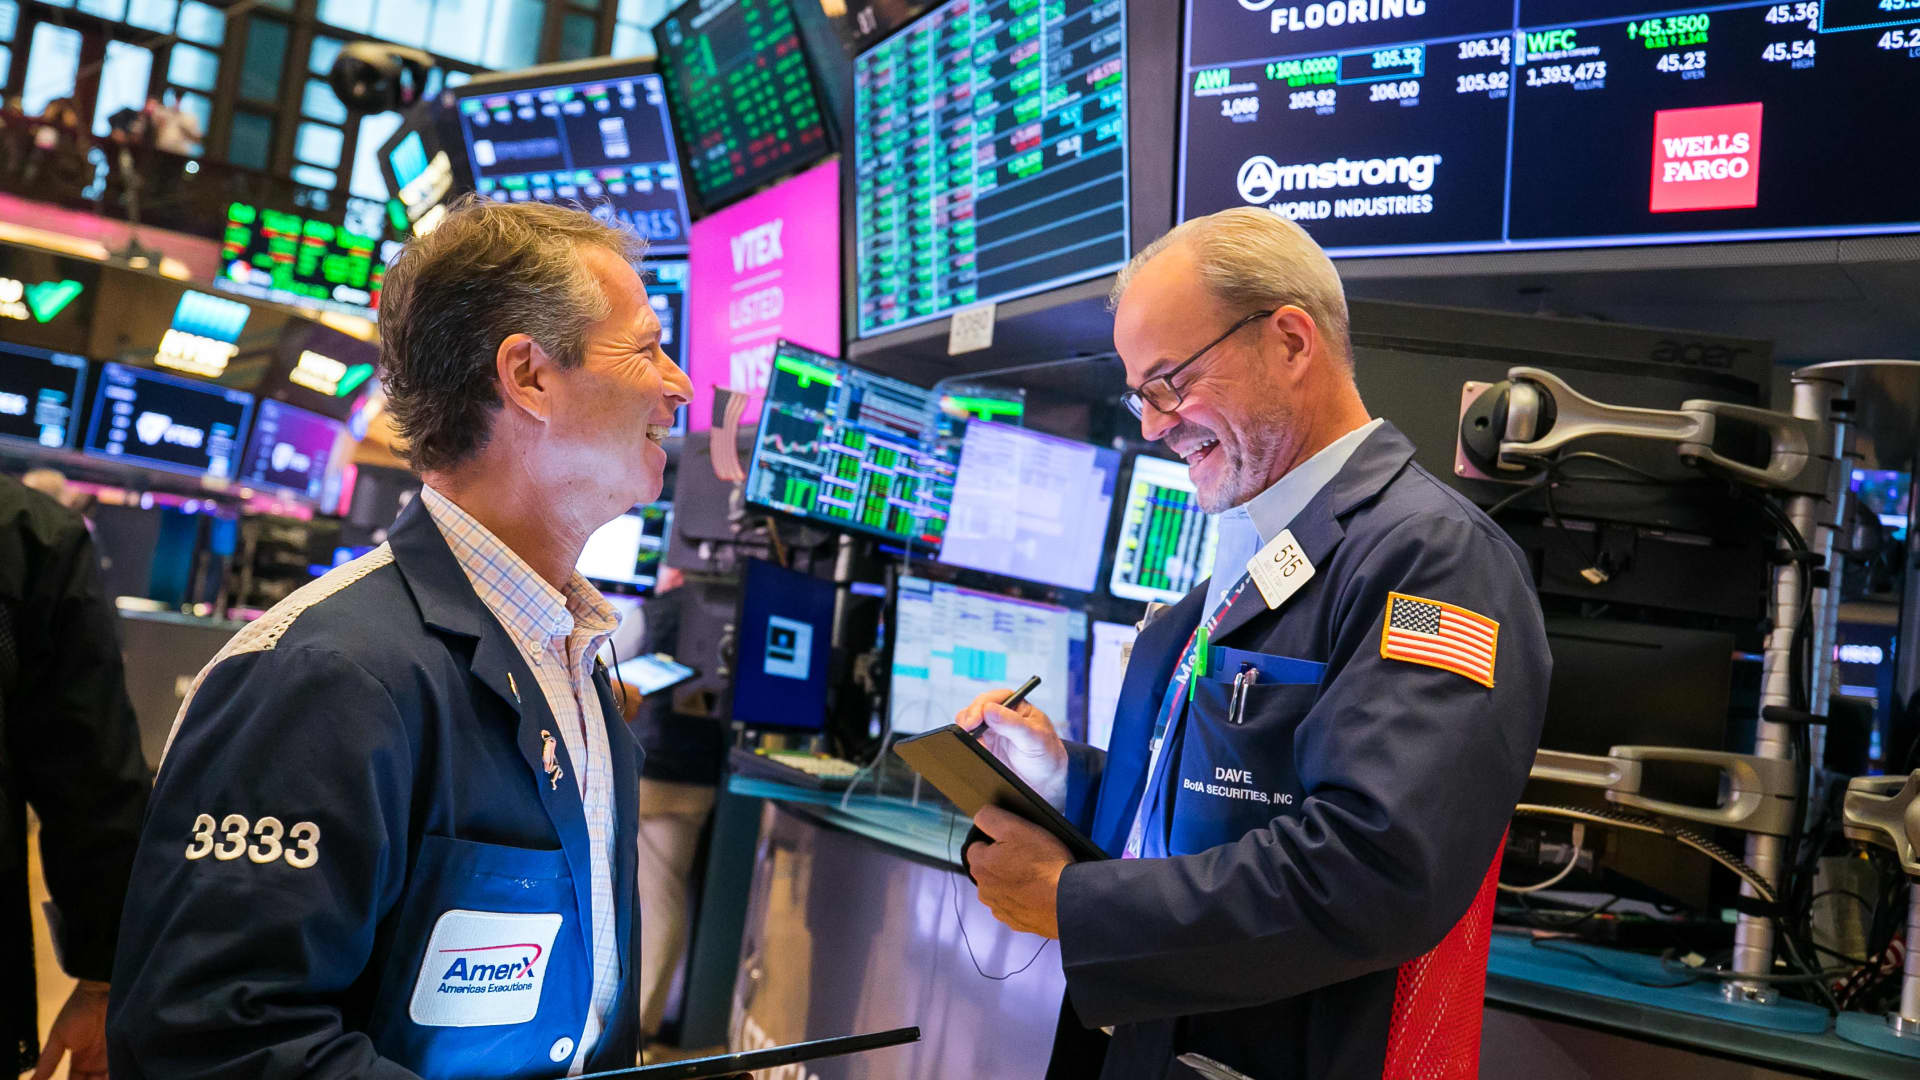 The New York Stock Exchange welcomes executives and guests of VTEX in celebration of its initial public offering on July 21, 2021.